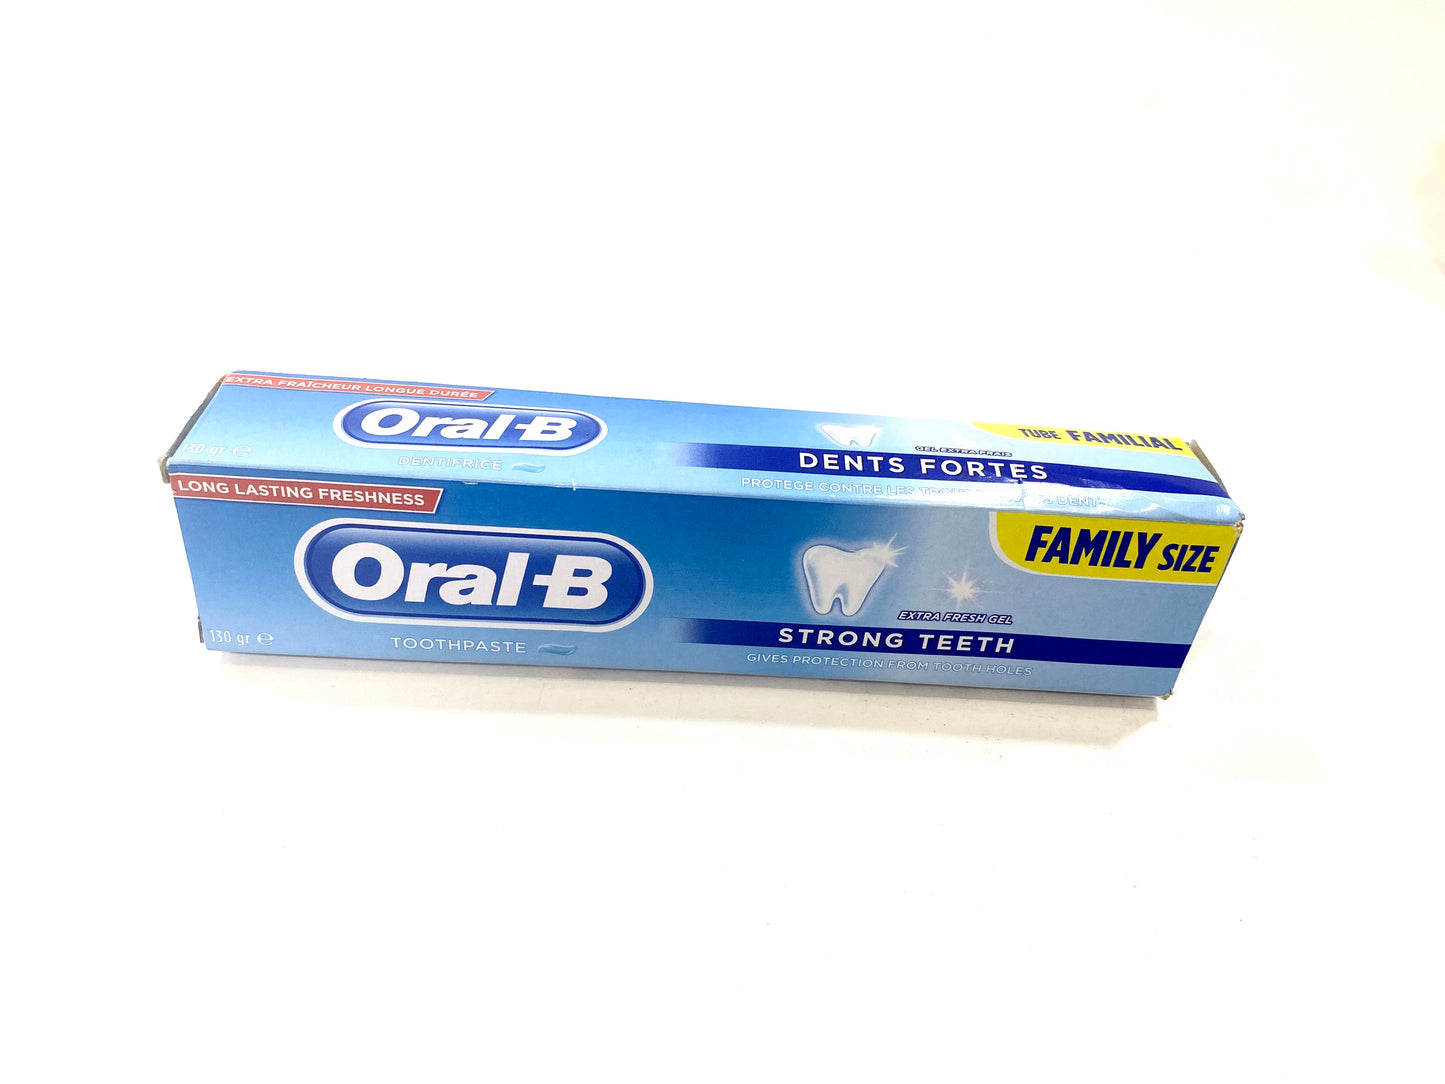 Oral B Family Size Toothpaste